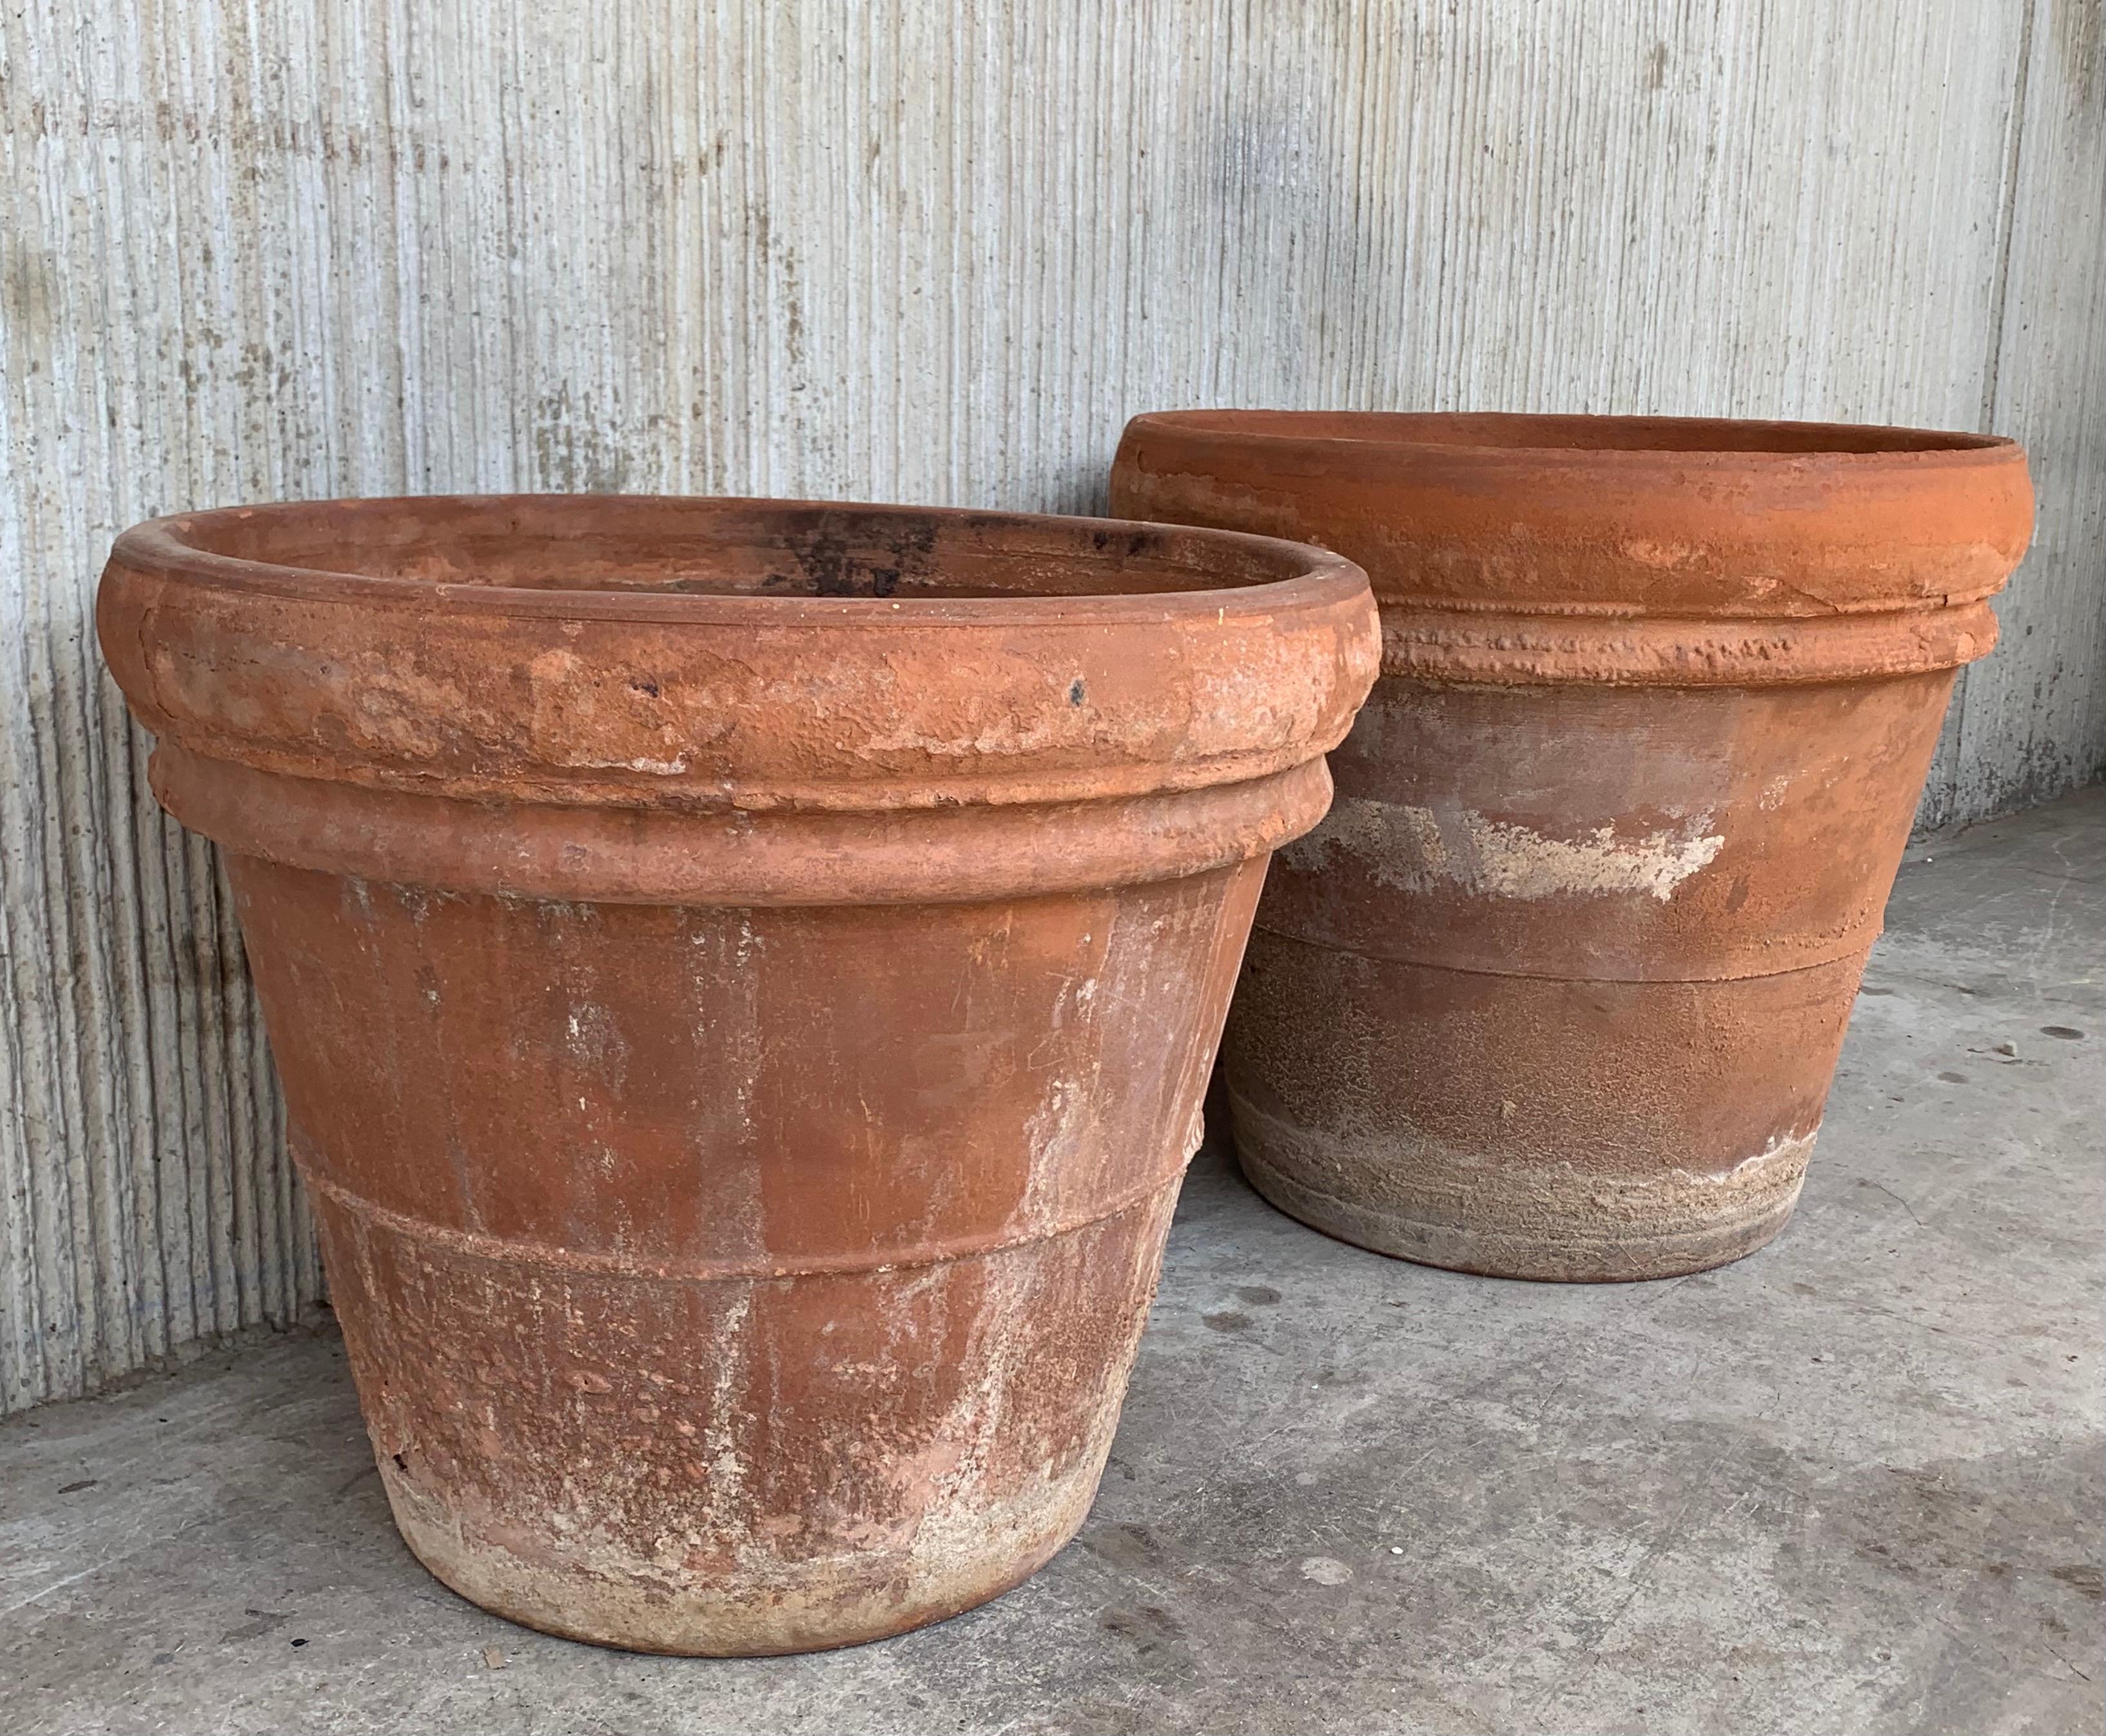 Pair of clay planters from Spain.